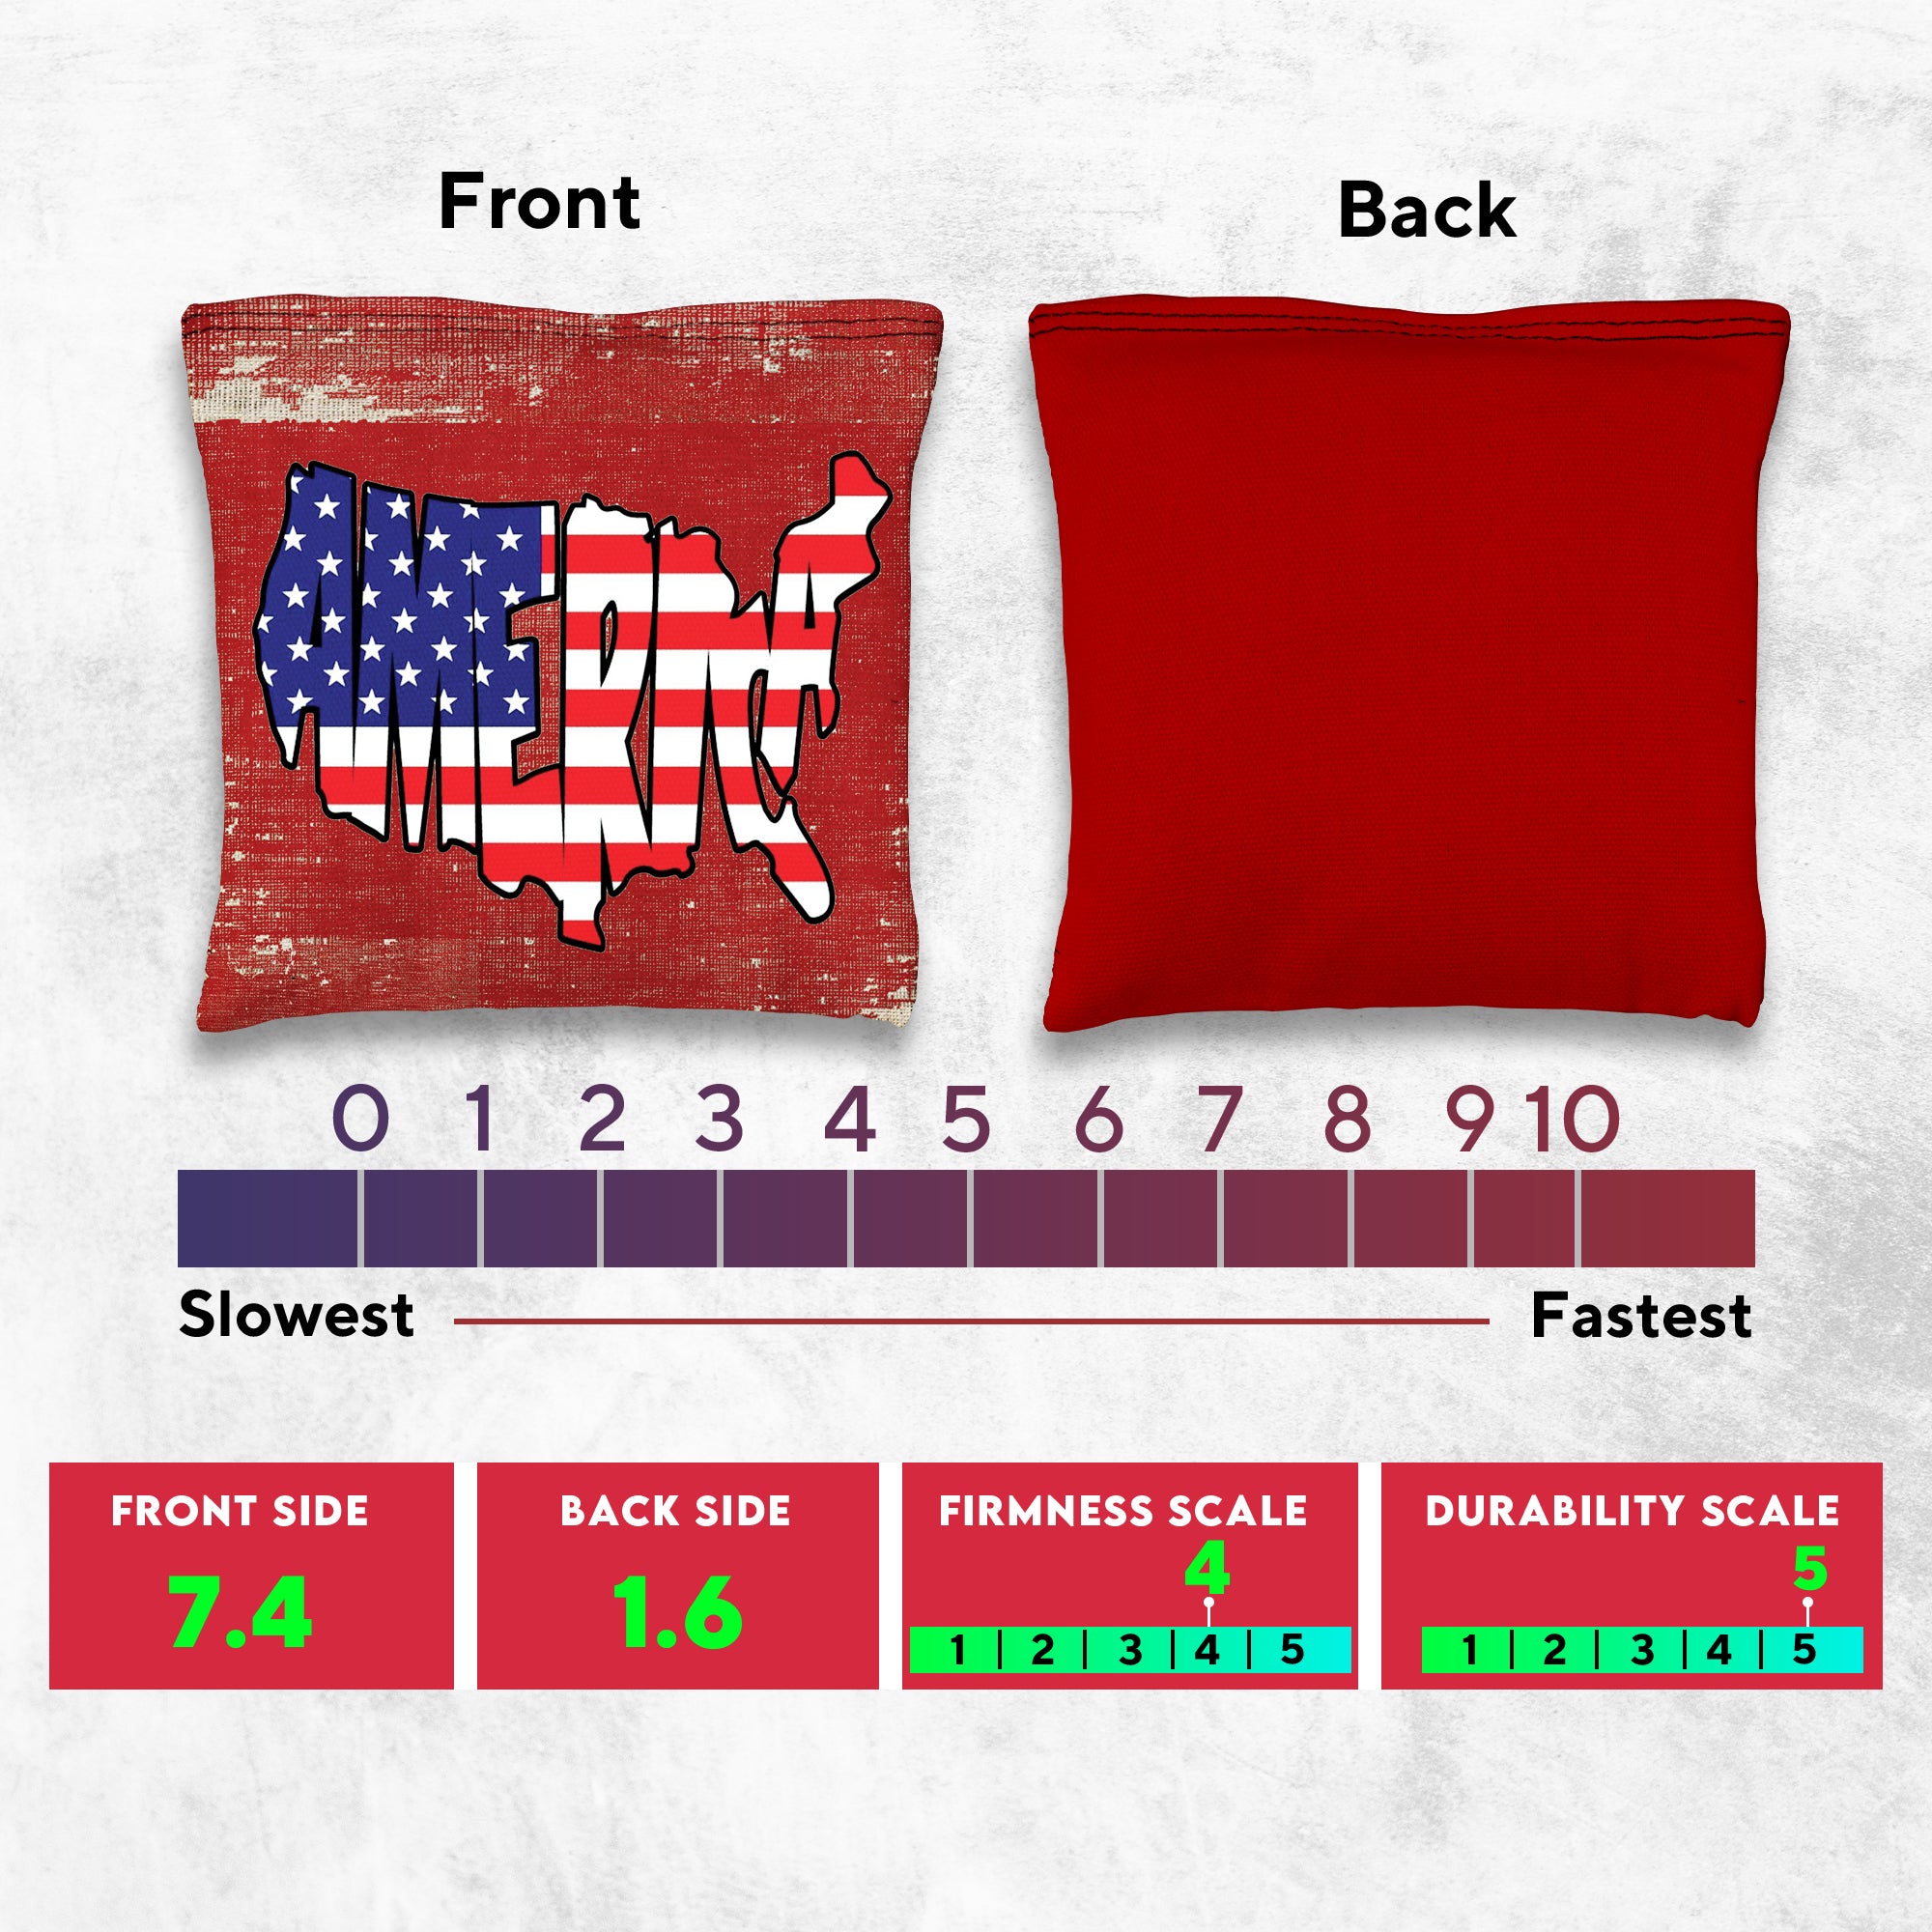 America Blue and Red Cornhole Bags